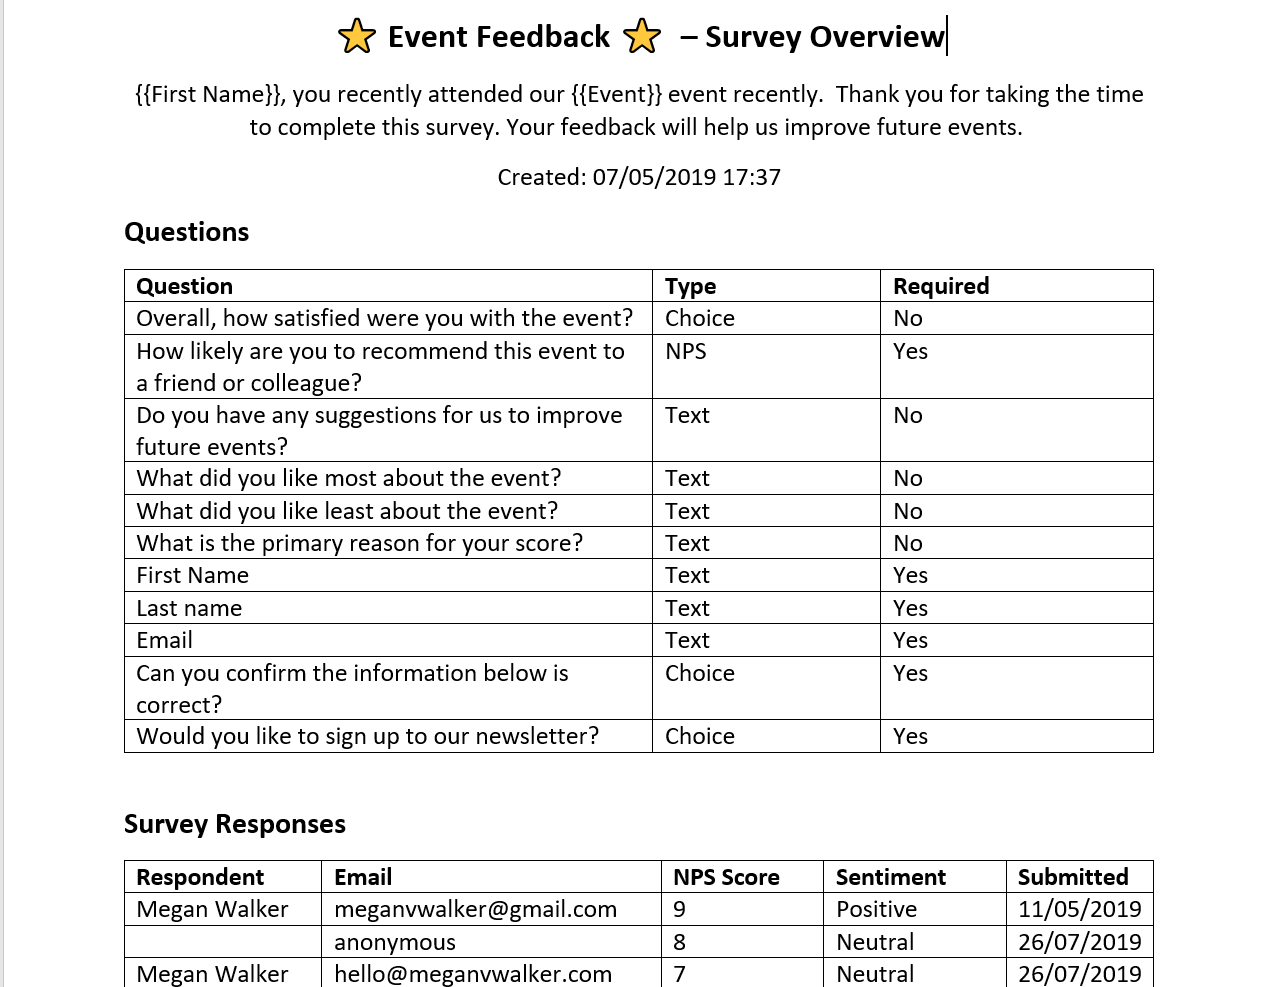 Survey Overview Using Word Document Templates - Microsoft Dynamics With Regard To Event Survey Template Word